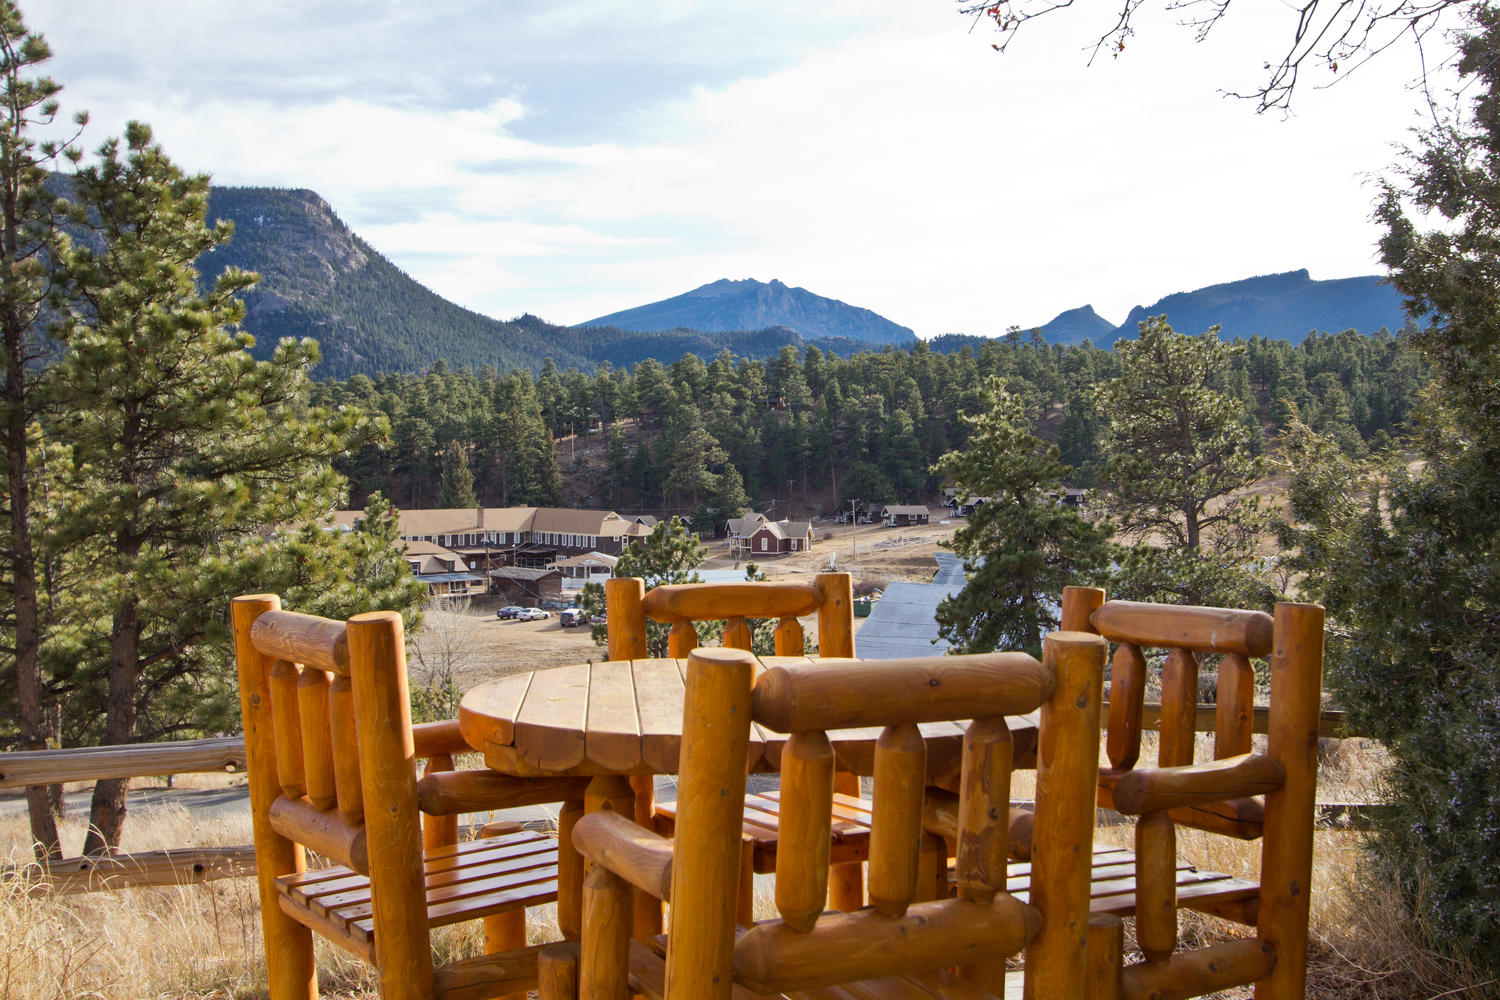 The Golden Leaf Inn is a boutique bed and breakfast in Estes Park, CO, that offers guests a charming, personalized stay with access to Colorado’s very best recreation activities.